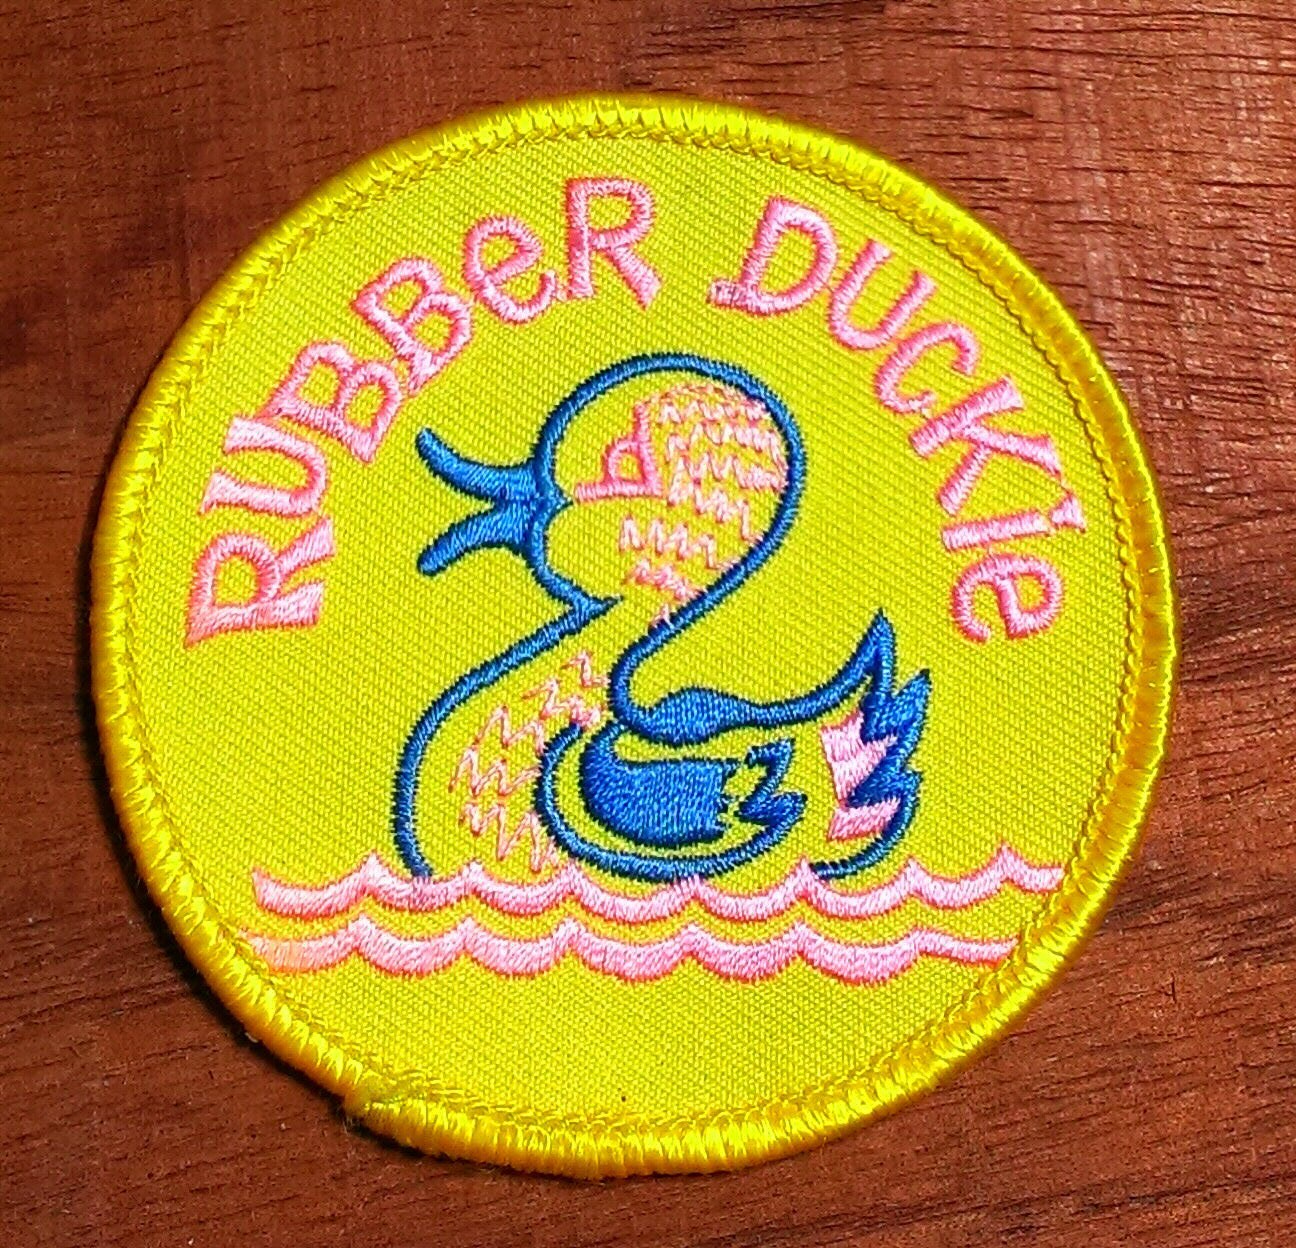 Vintage 1960s Rubber Duckie Embroidered Patch 4552